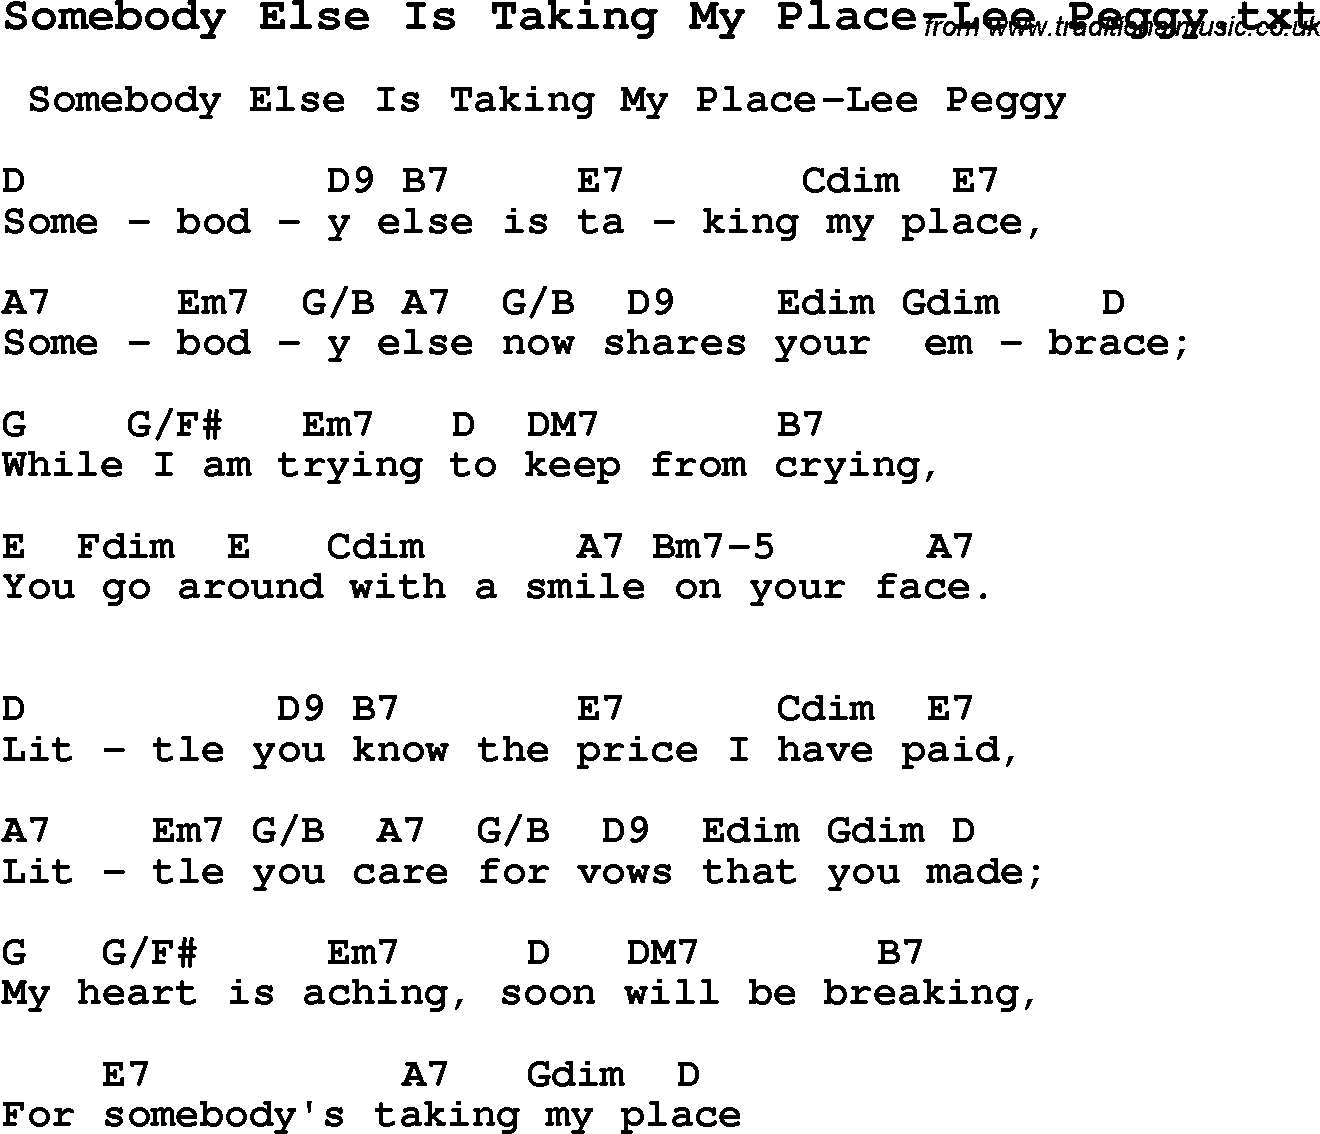 Jazz Song from top bands and vocal artists with chords, tabs and lyrics - Somebody Else Is Taking My Place-Lee Peggy